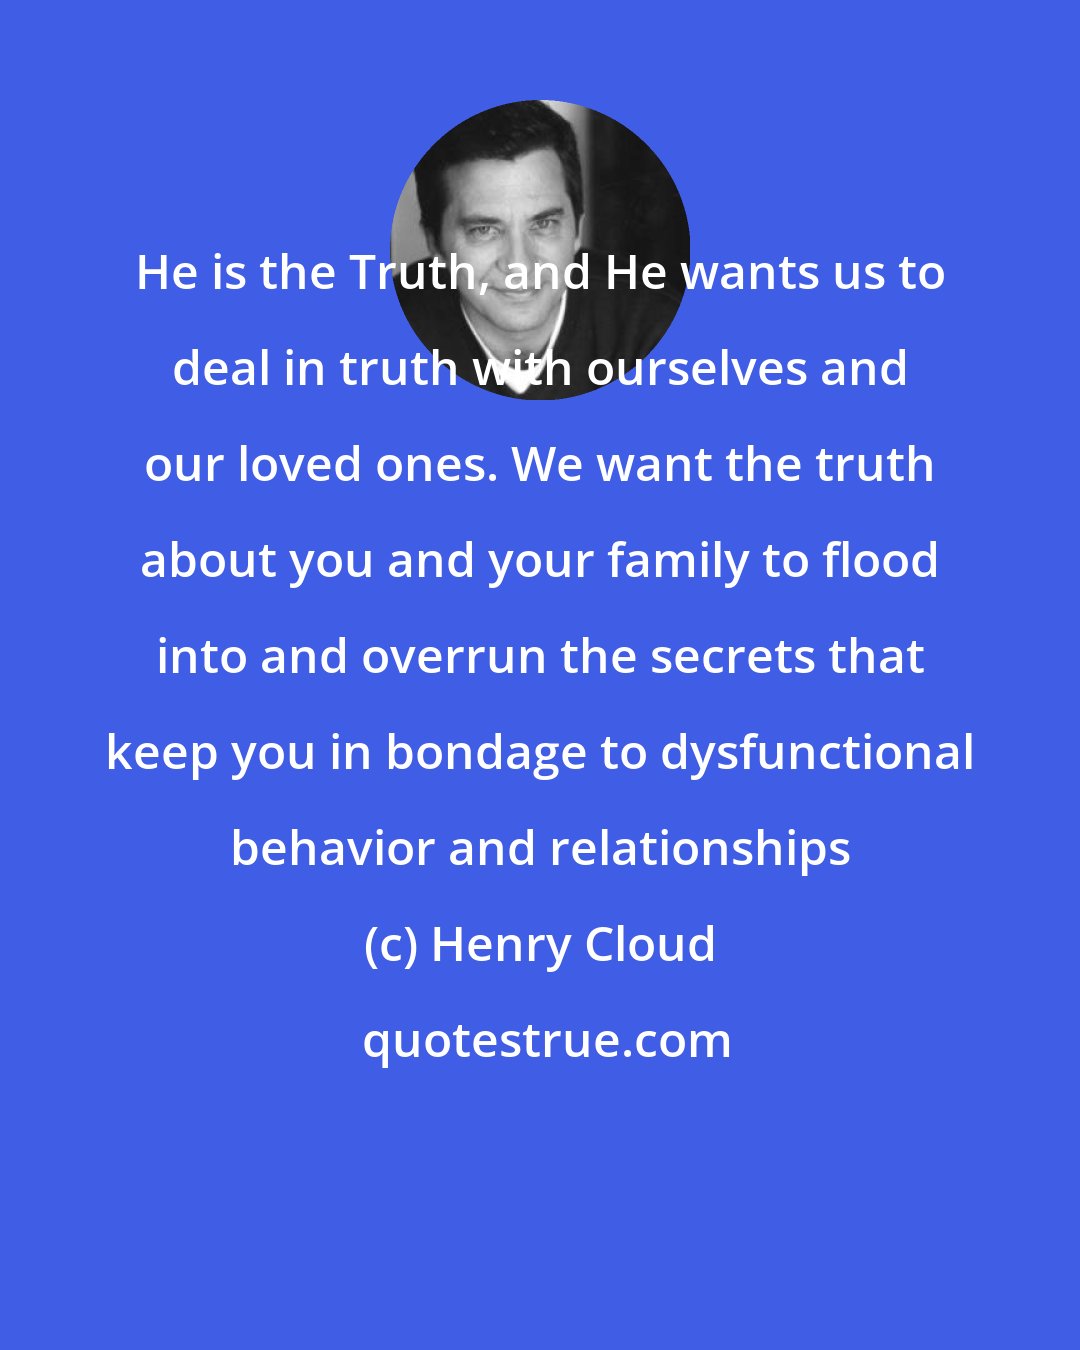 Henry Cloud: He is the Truth, and He wants us to deal in truth with ourselves and our loved ones. We want the truth about you and your family to flood into and overrun the secrets that keep you in bondage to dysfunctional behavior and relationships